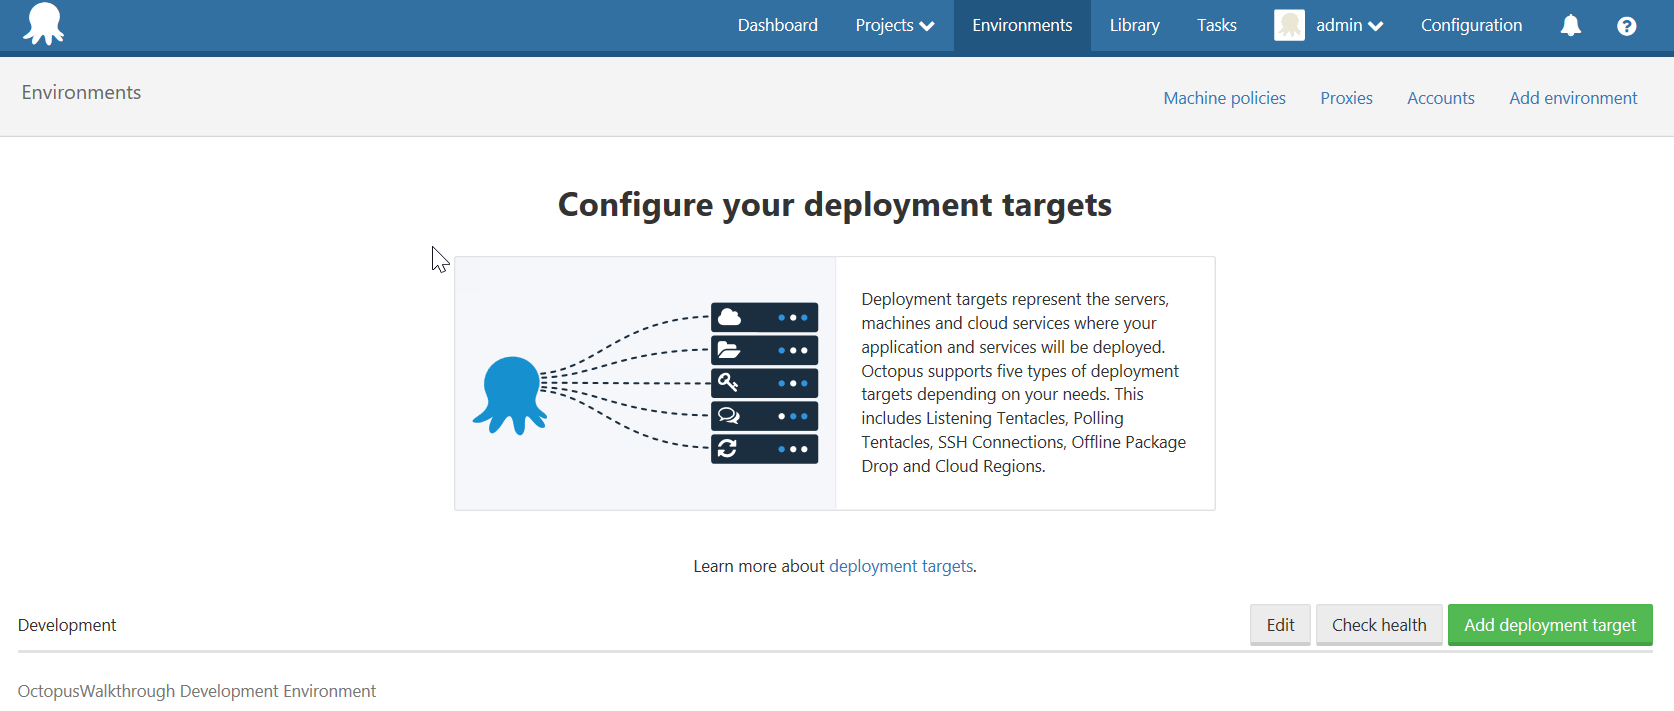 Screenshot of the Octopus Deploy dashboard. Under Environments, the Configure your deployment targets message displays.